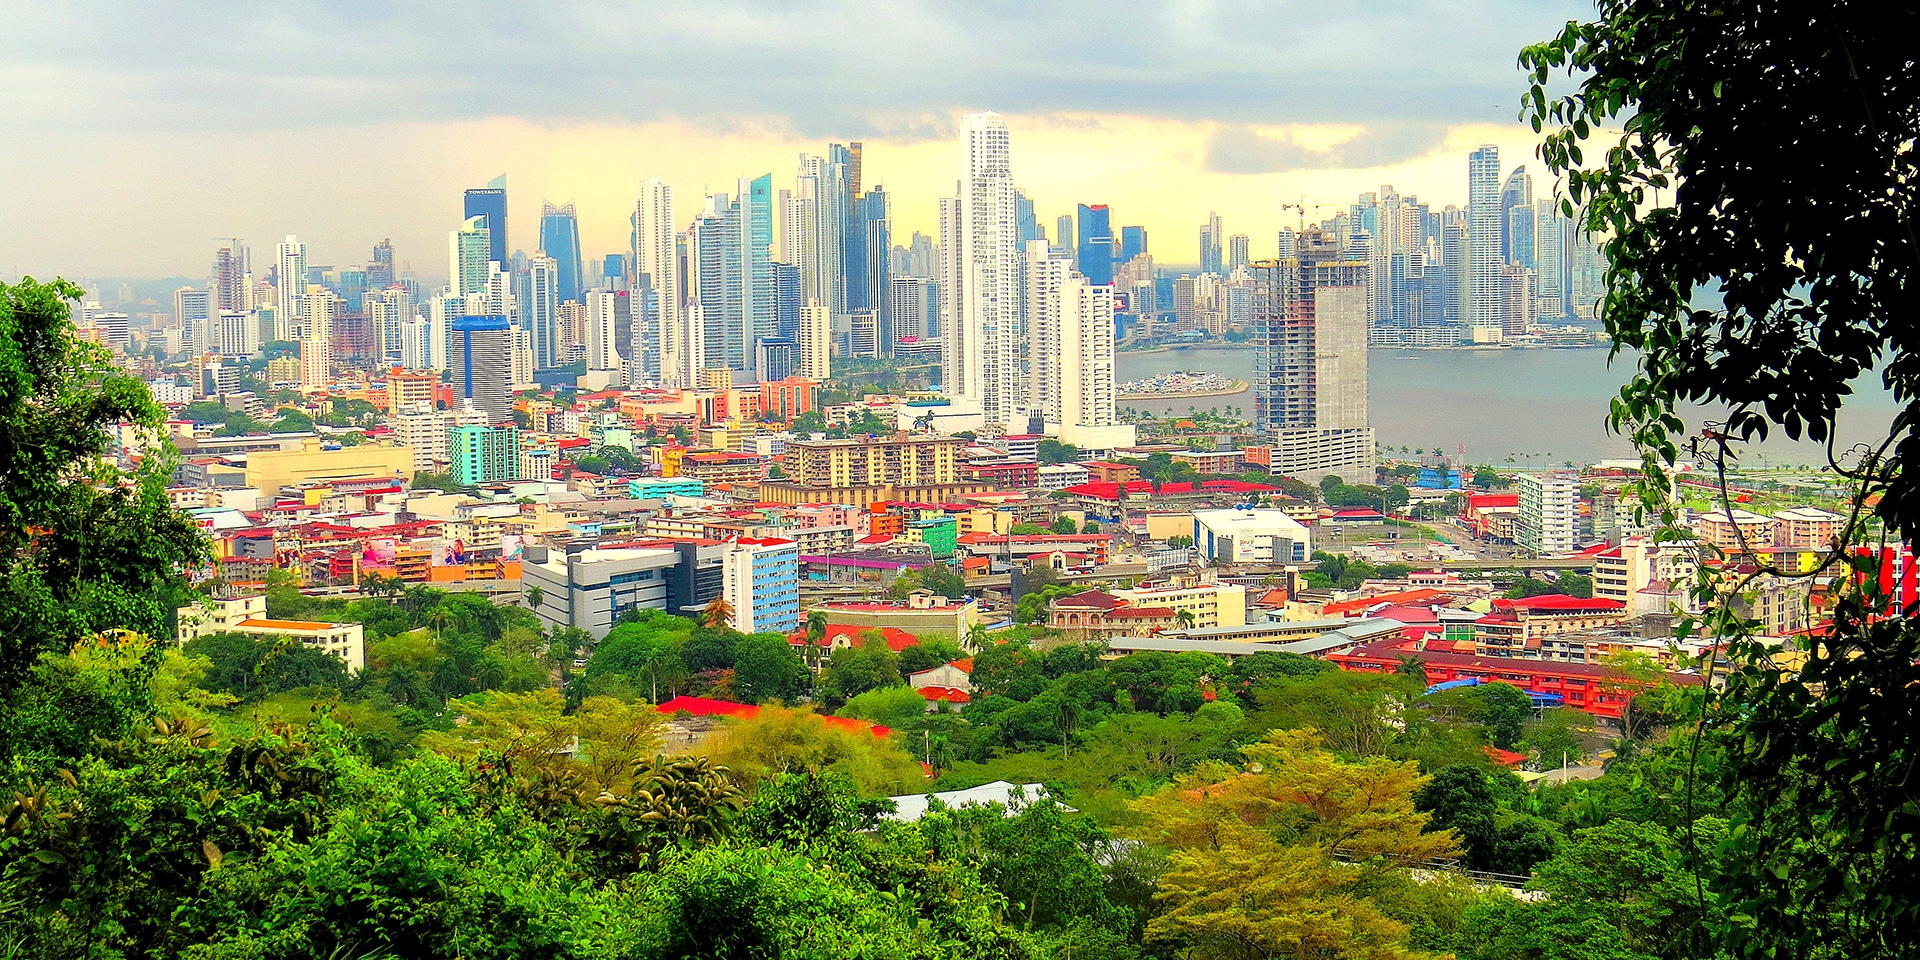 5 Places in Panama City to Bring out Your Wild Side